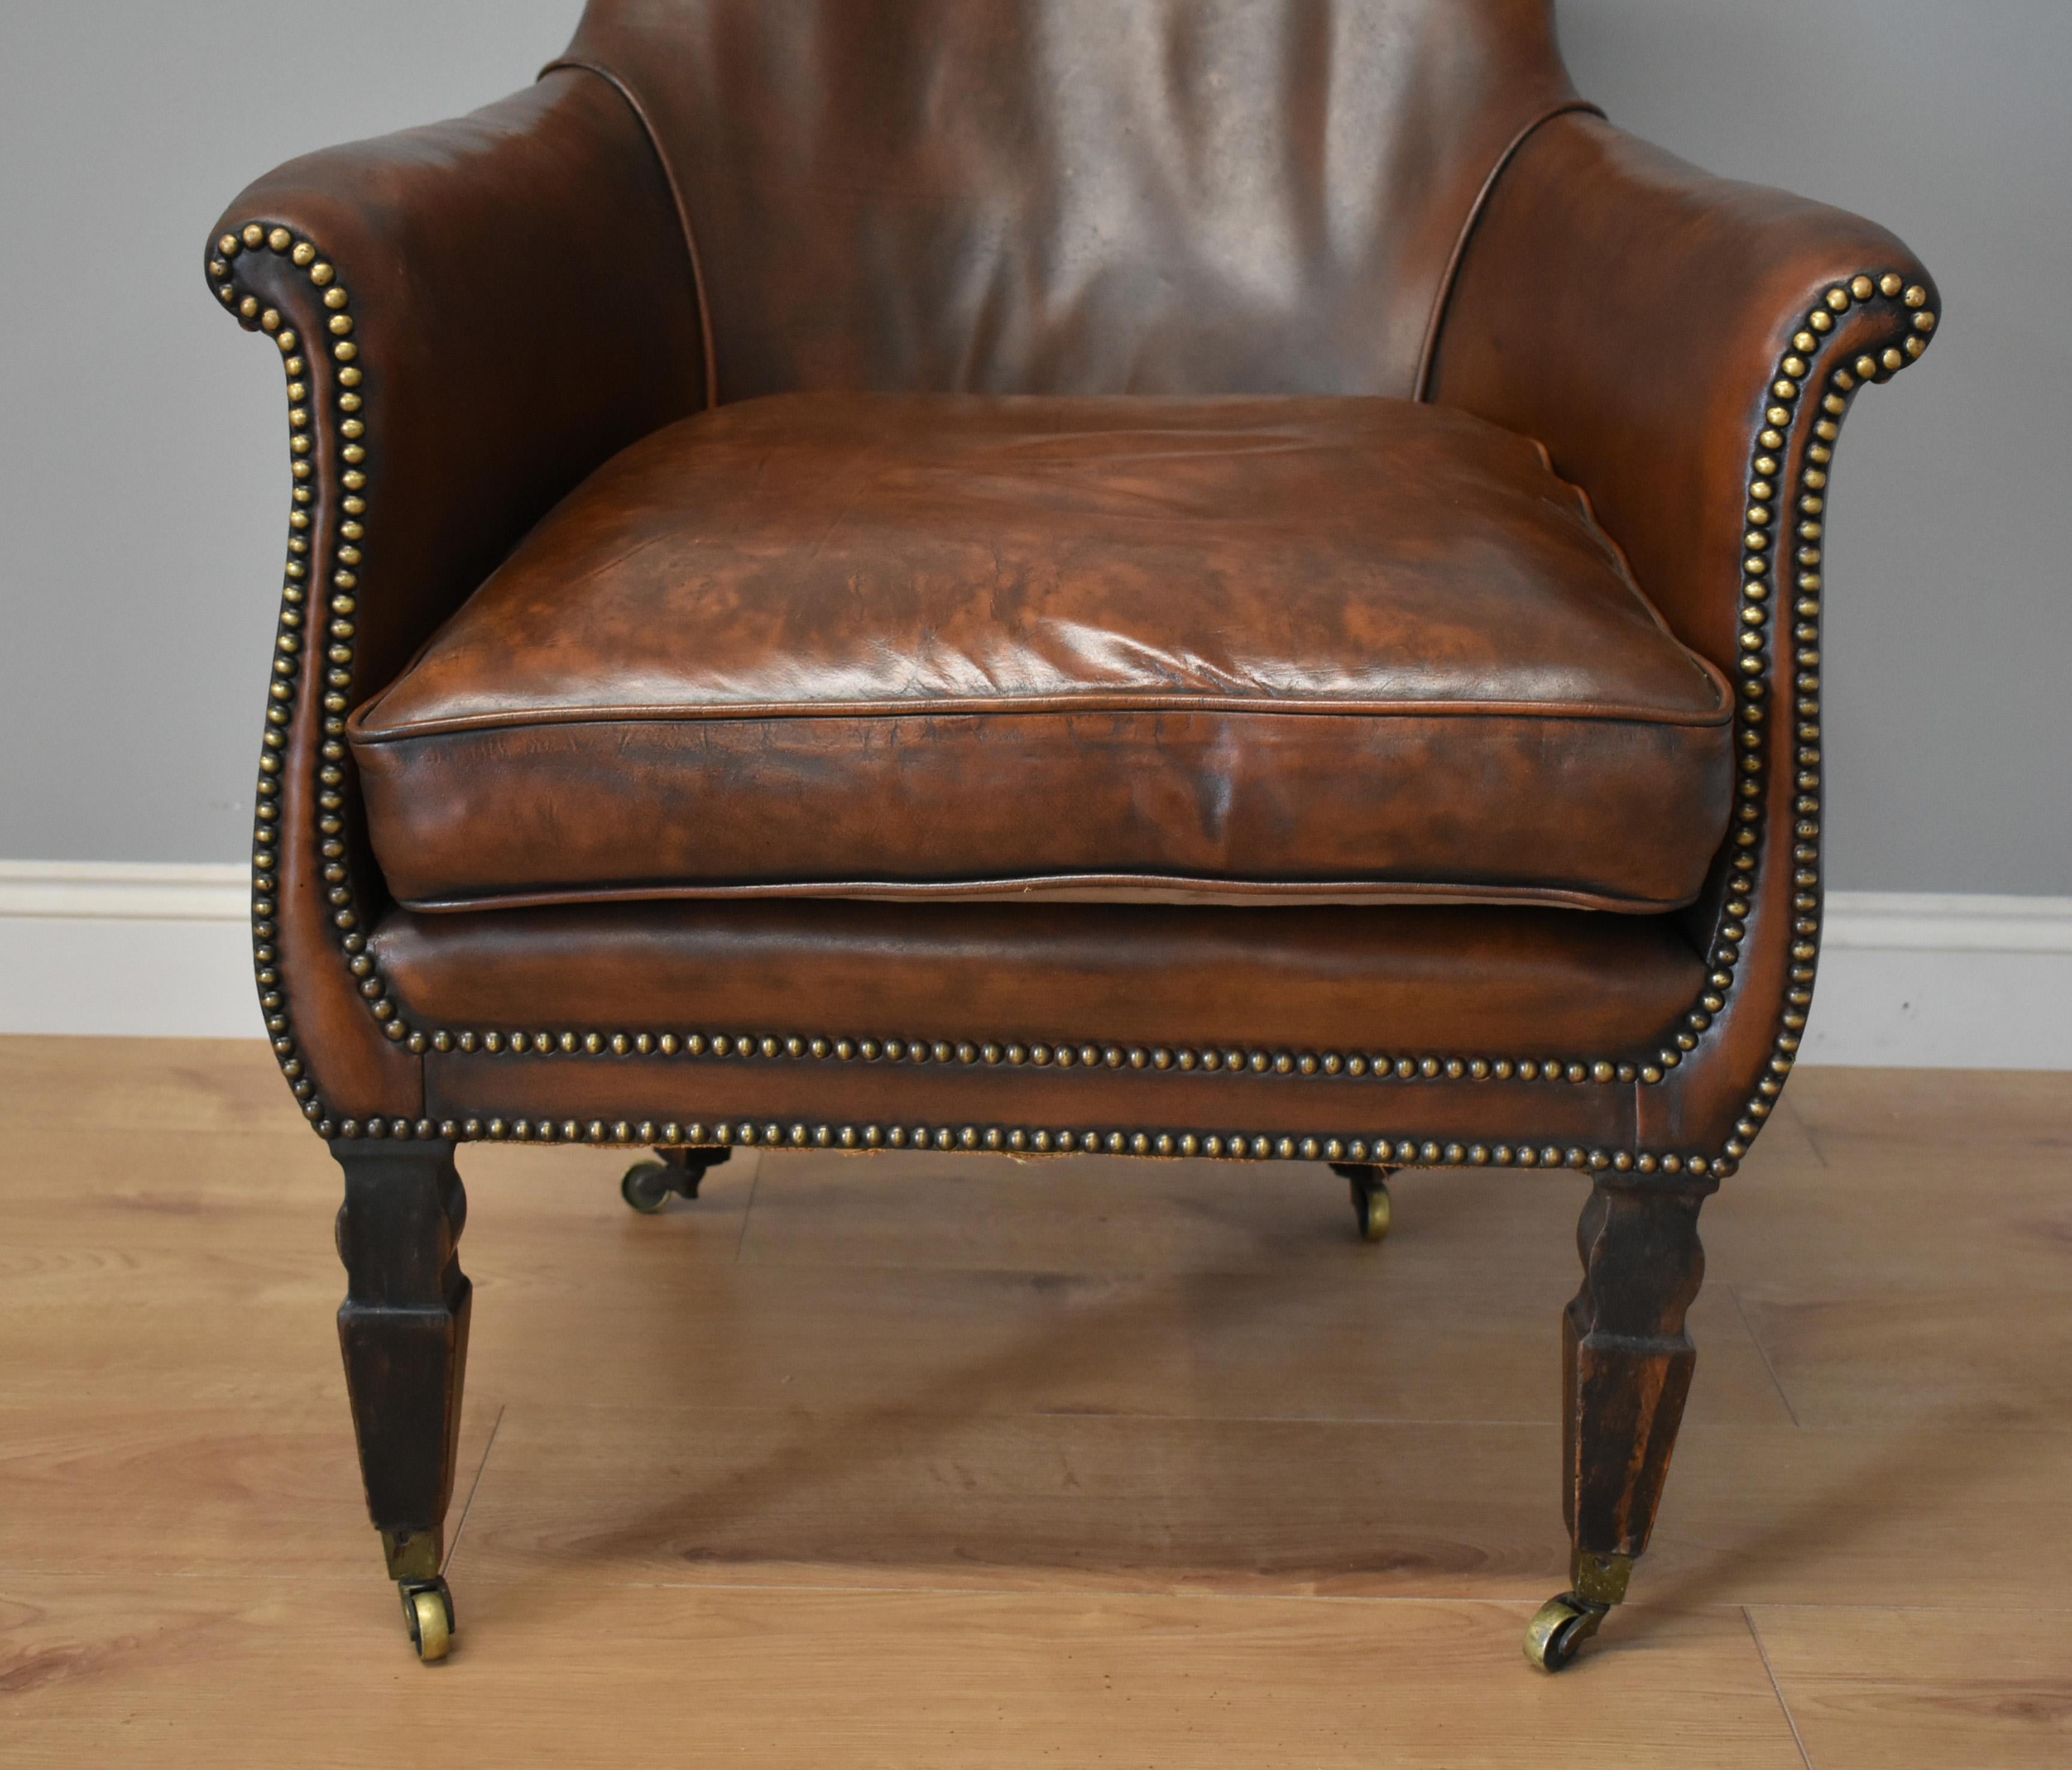 Dyed 19th Century Regency Leather Armchair